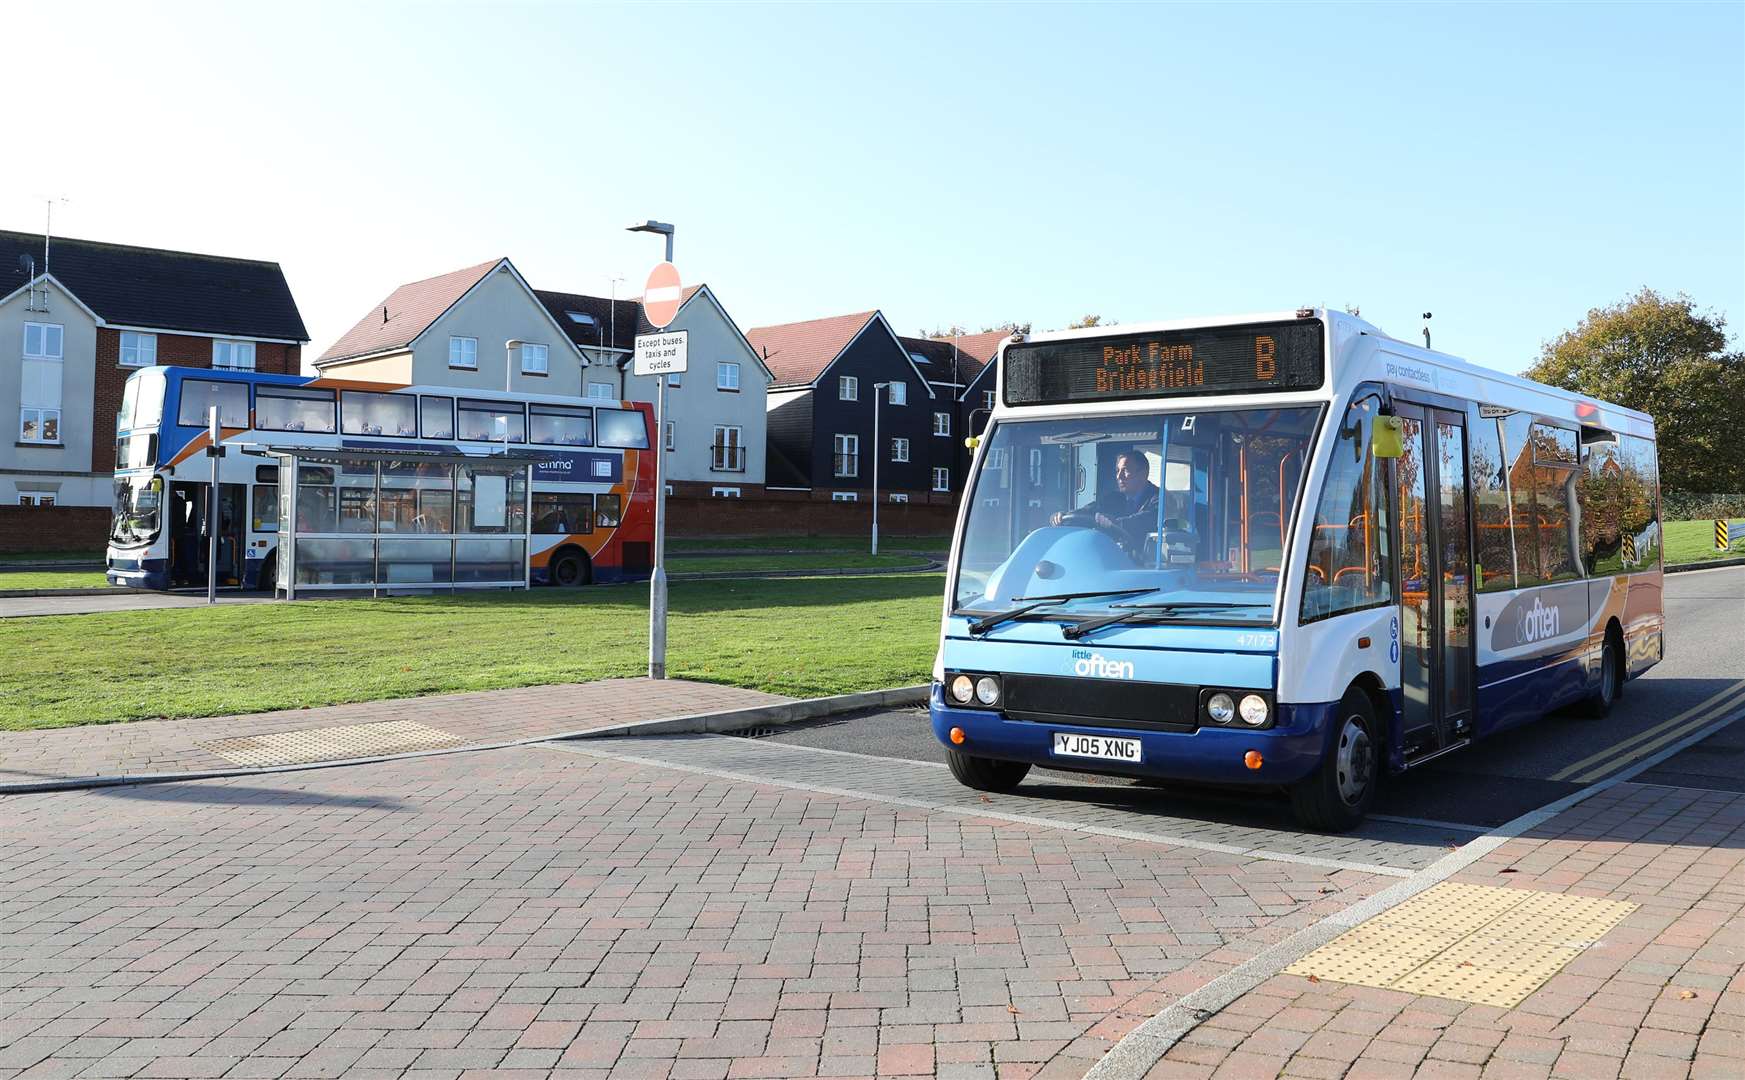 Bus services on the Bridgefield estate were suspended on Monday